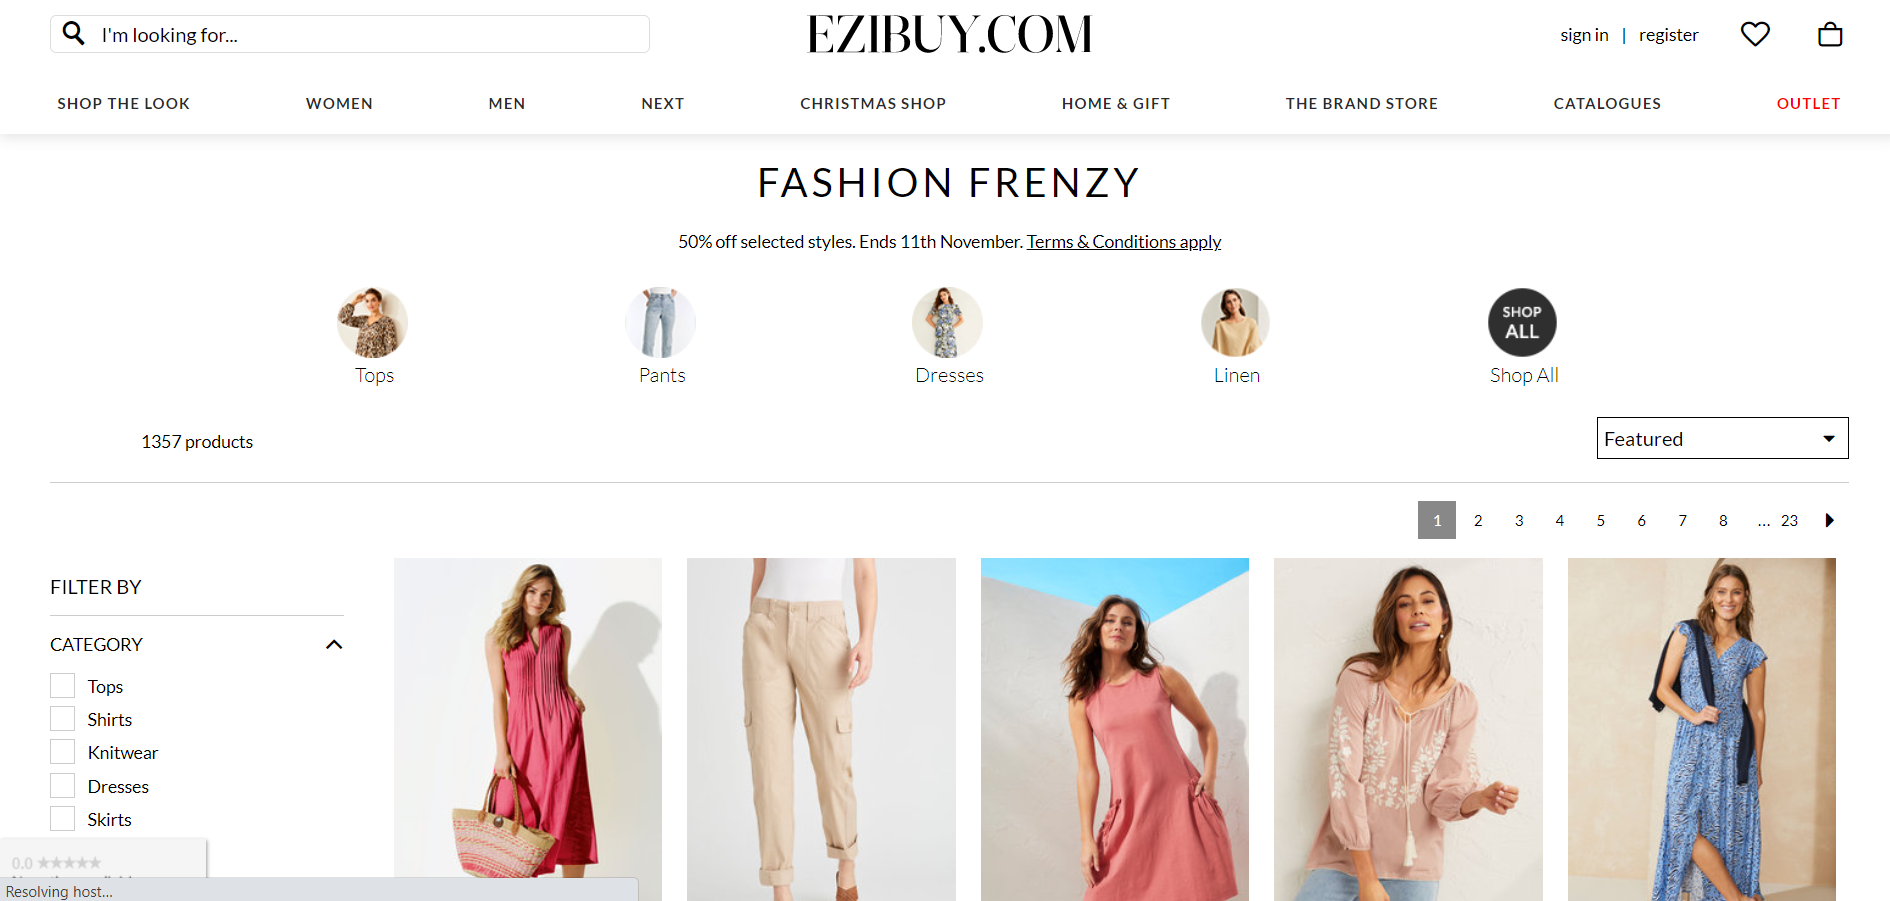 Ezibuy Frenzy sale 50% OFF on selected style including dresses, tops & more